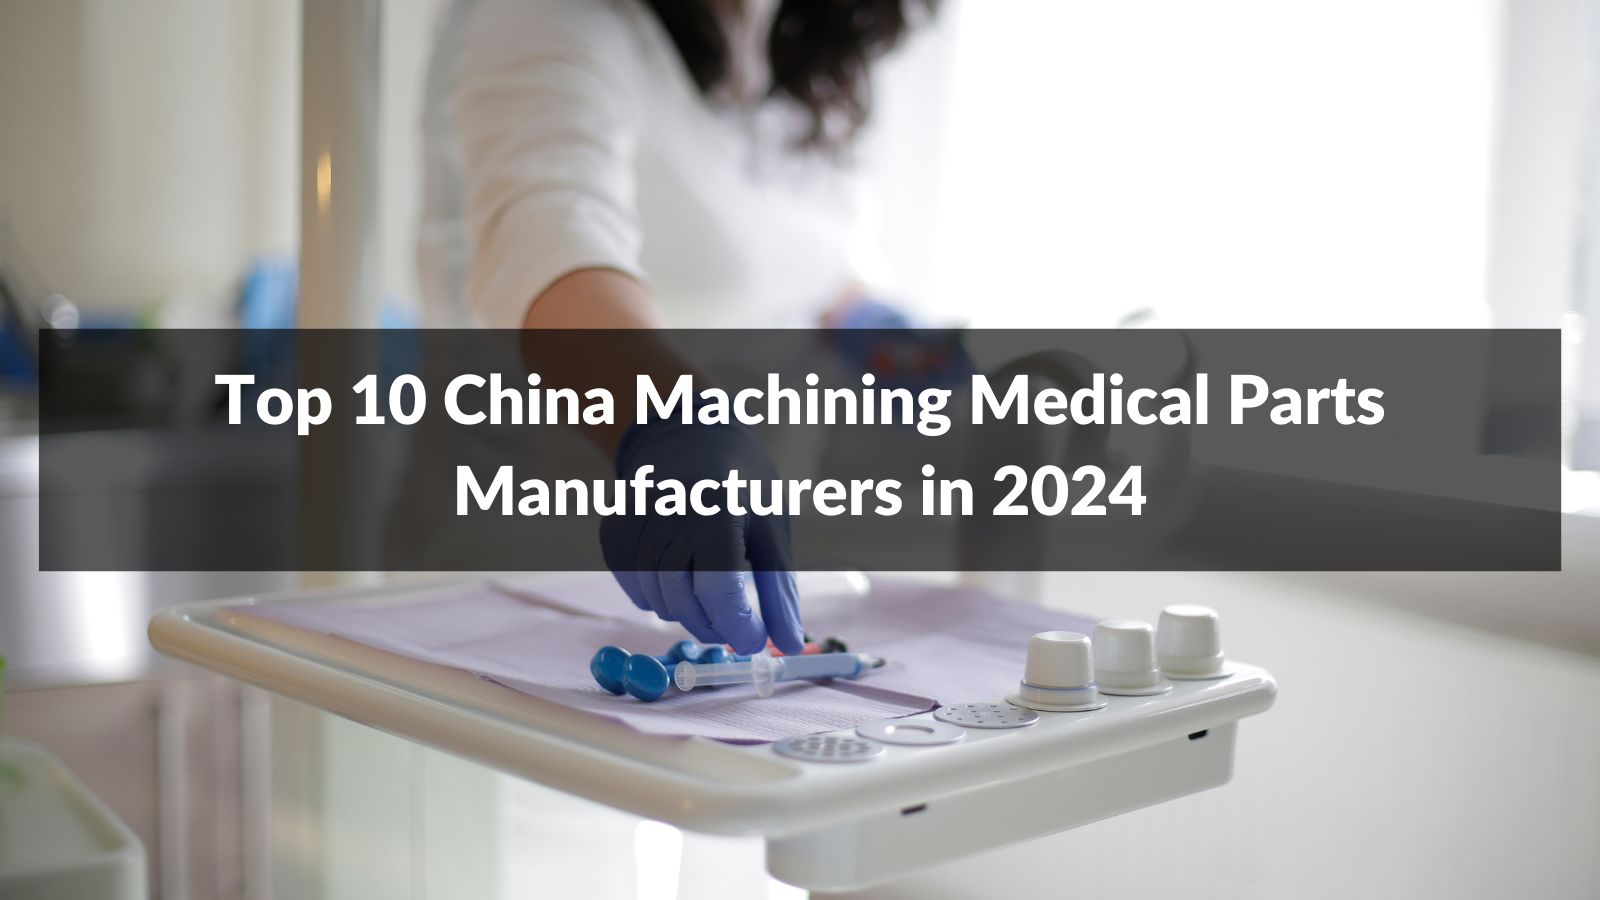 Top 10 China Machining Medical Parts Manufacturers in 2024